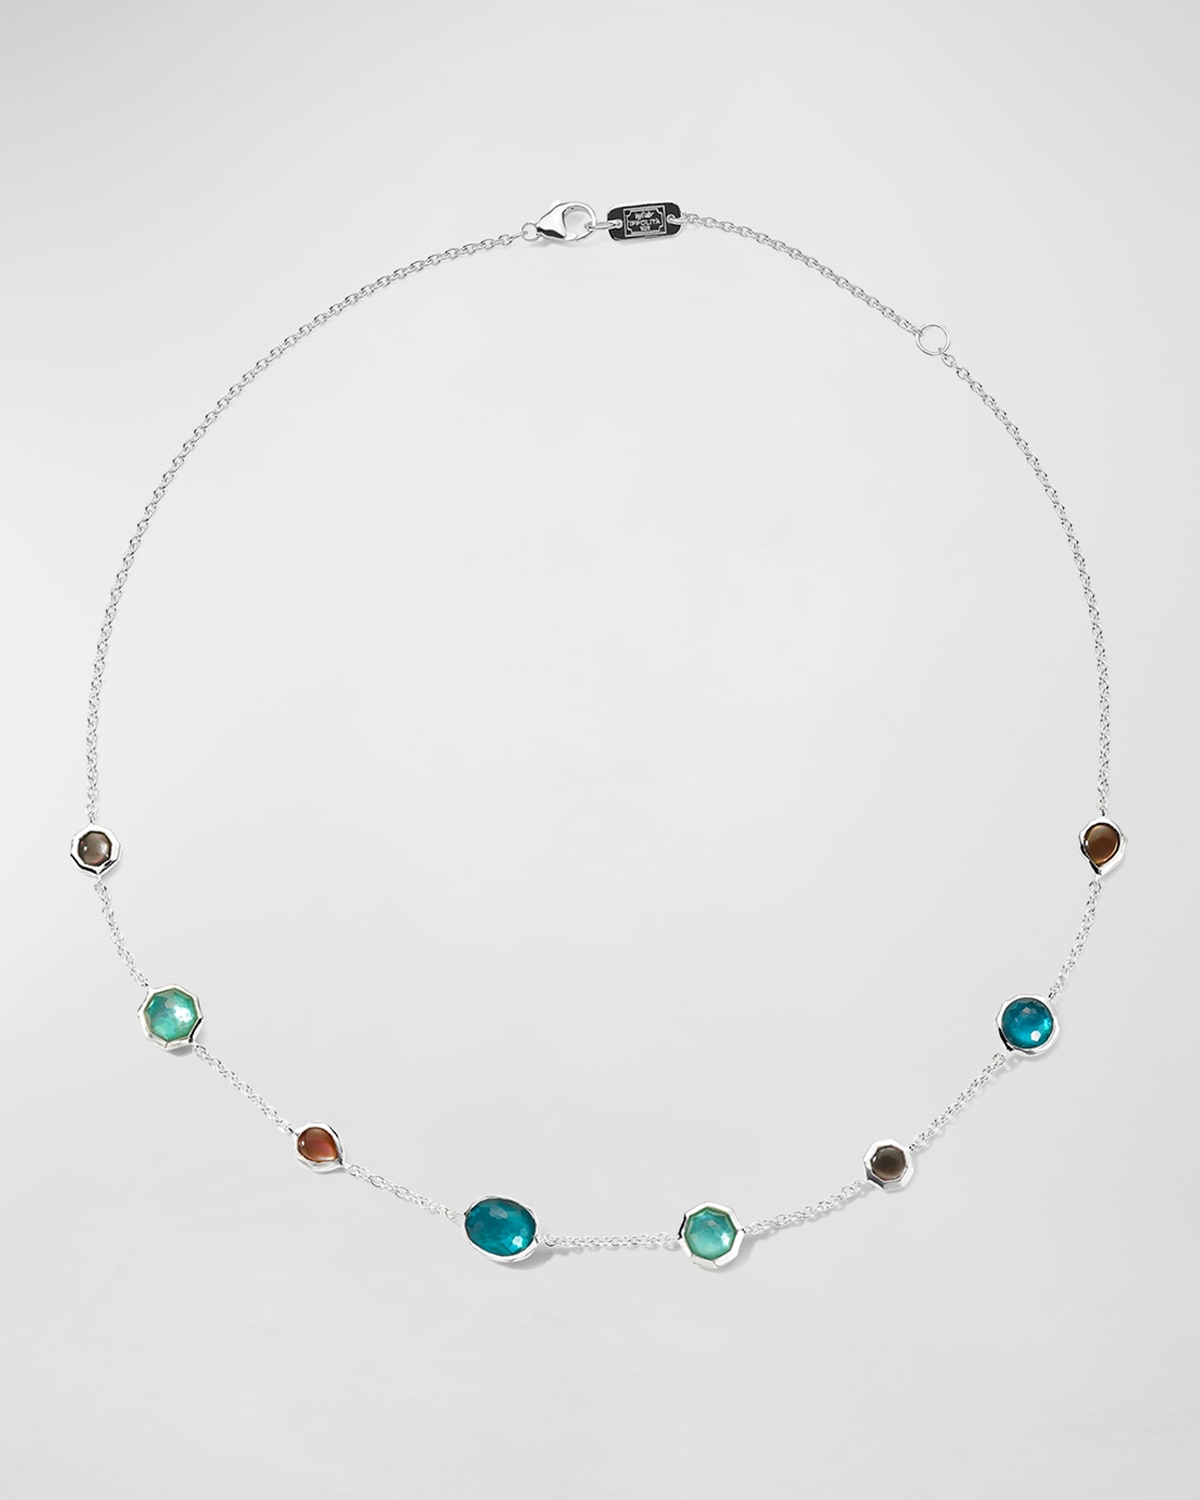 IPPOLITA MINI STATION NECKLACE IN STERLING SILVER